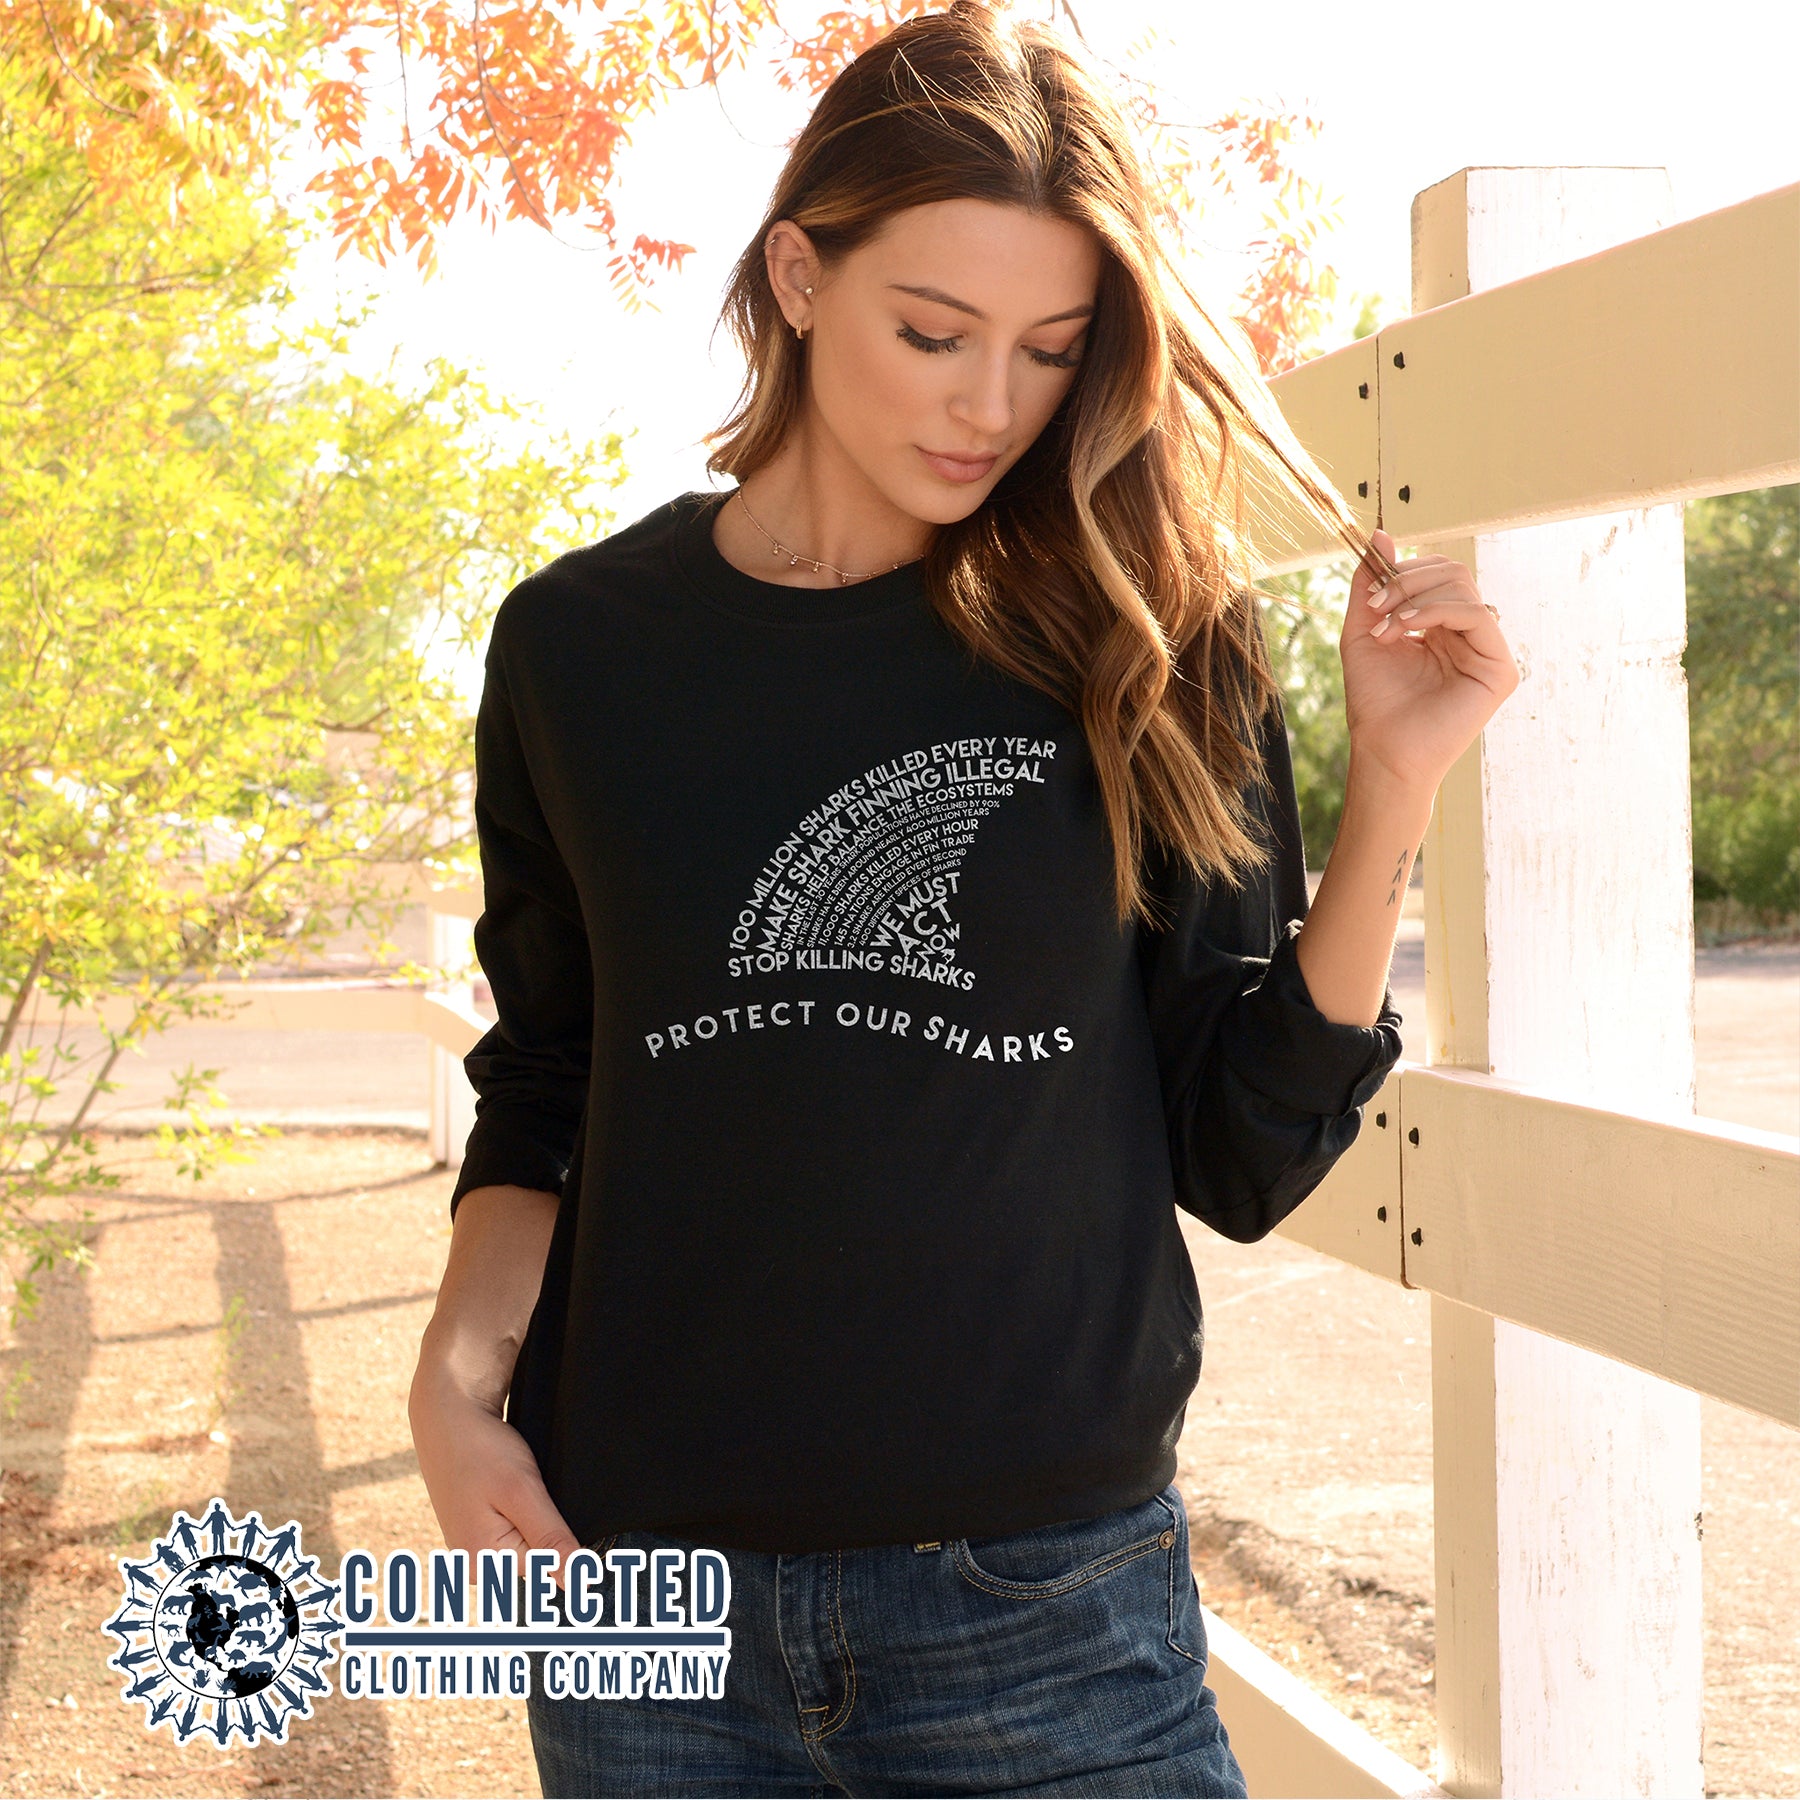 Black Protect Our Sharks Long-Sleeve Tee - architectconstructor - Ethically and Sustainably Made - 10% donated to Oceana shark conservation